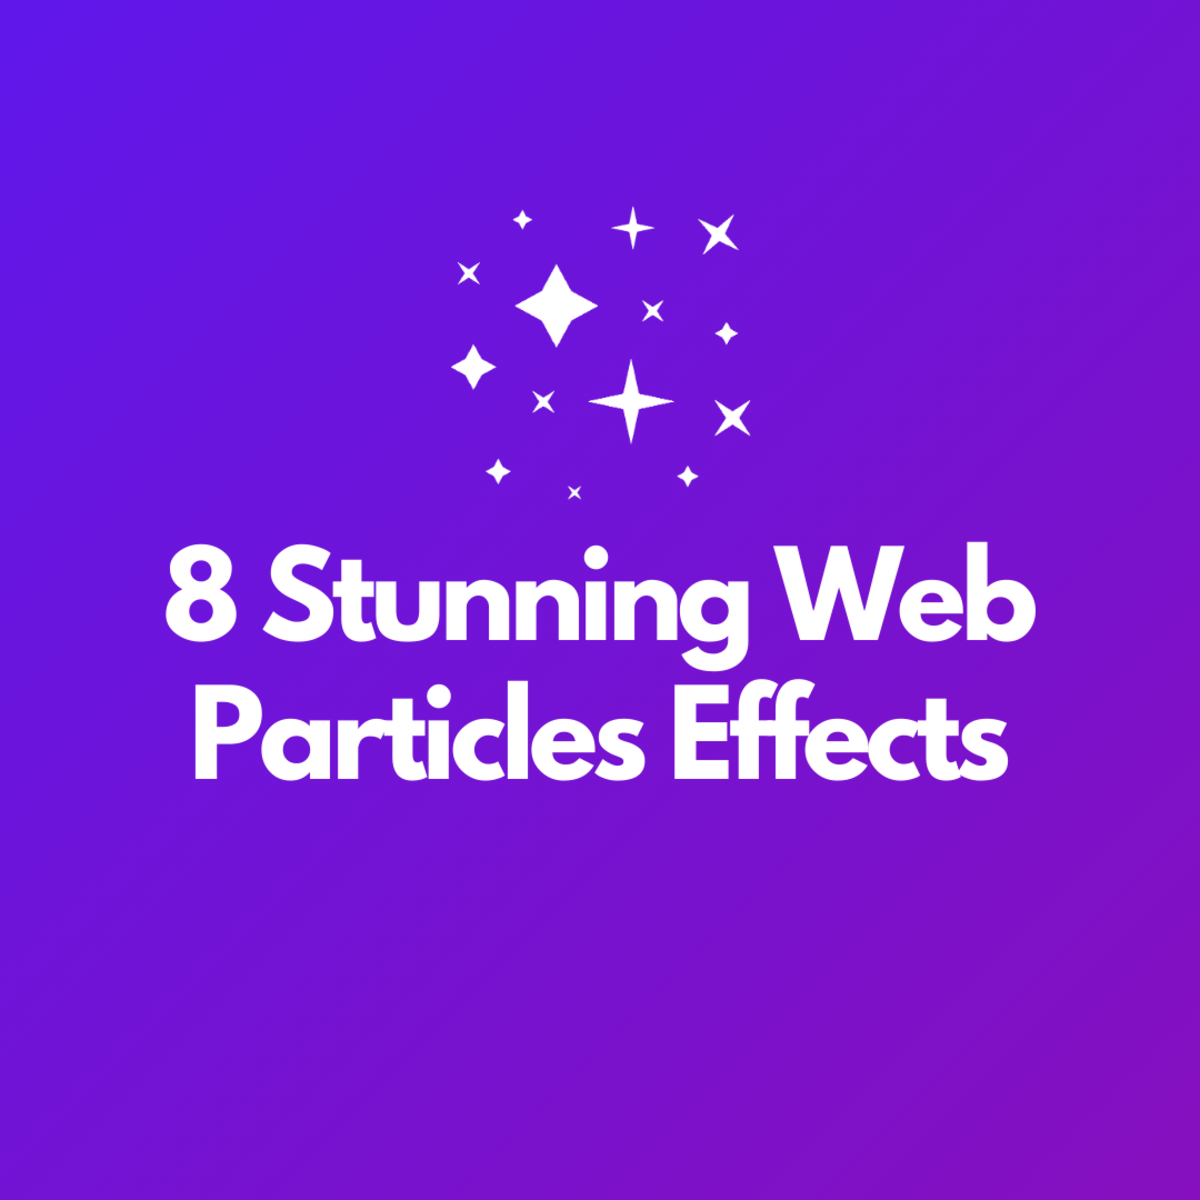 8 Beautiful Web Particles Effects to Check Out: The Ultimate List